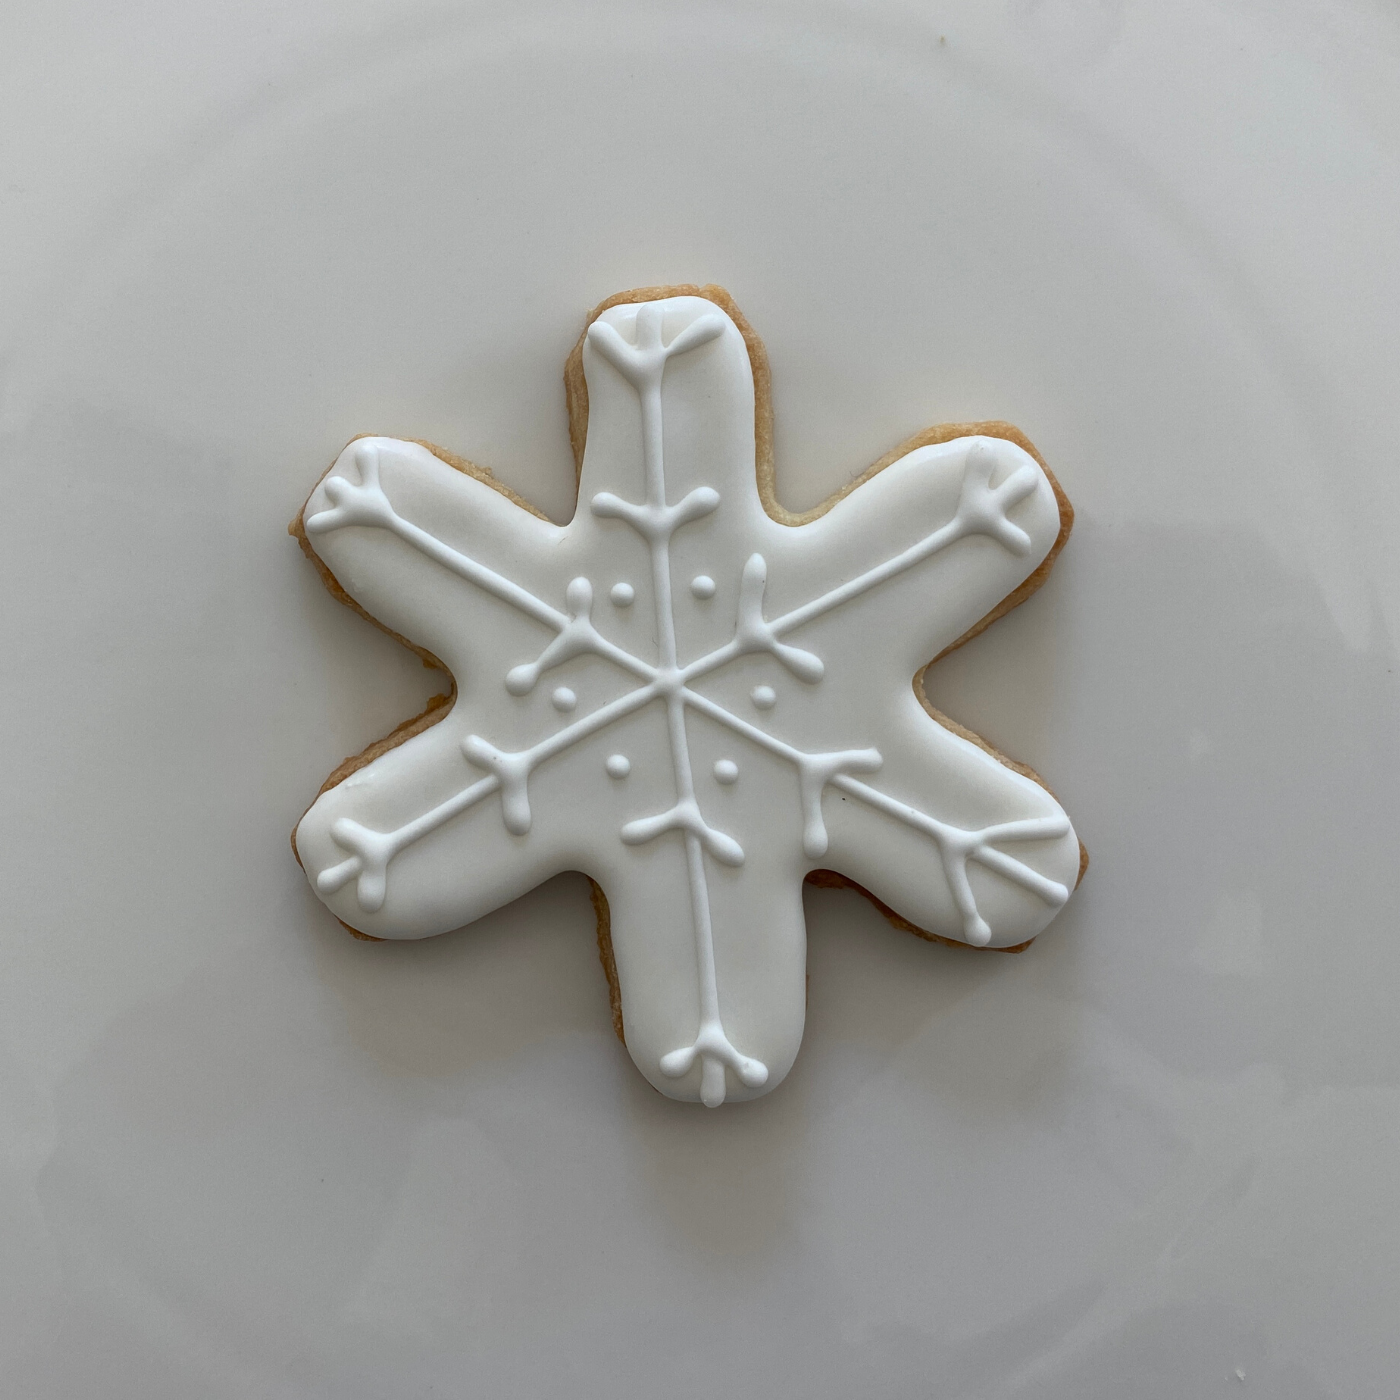 Lifestyle image of a completed Christmas snowflake cookie 